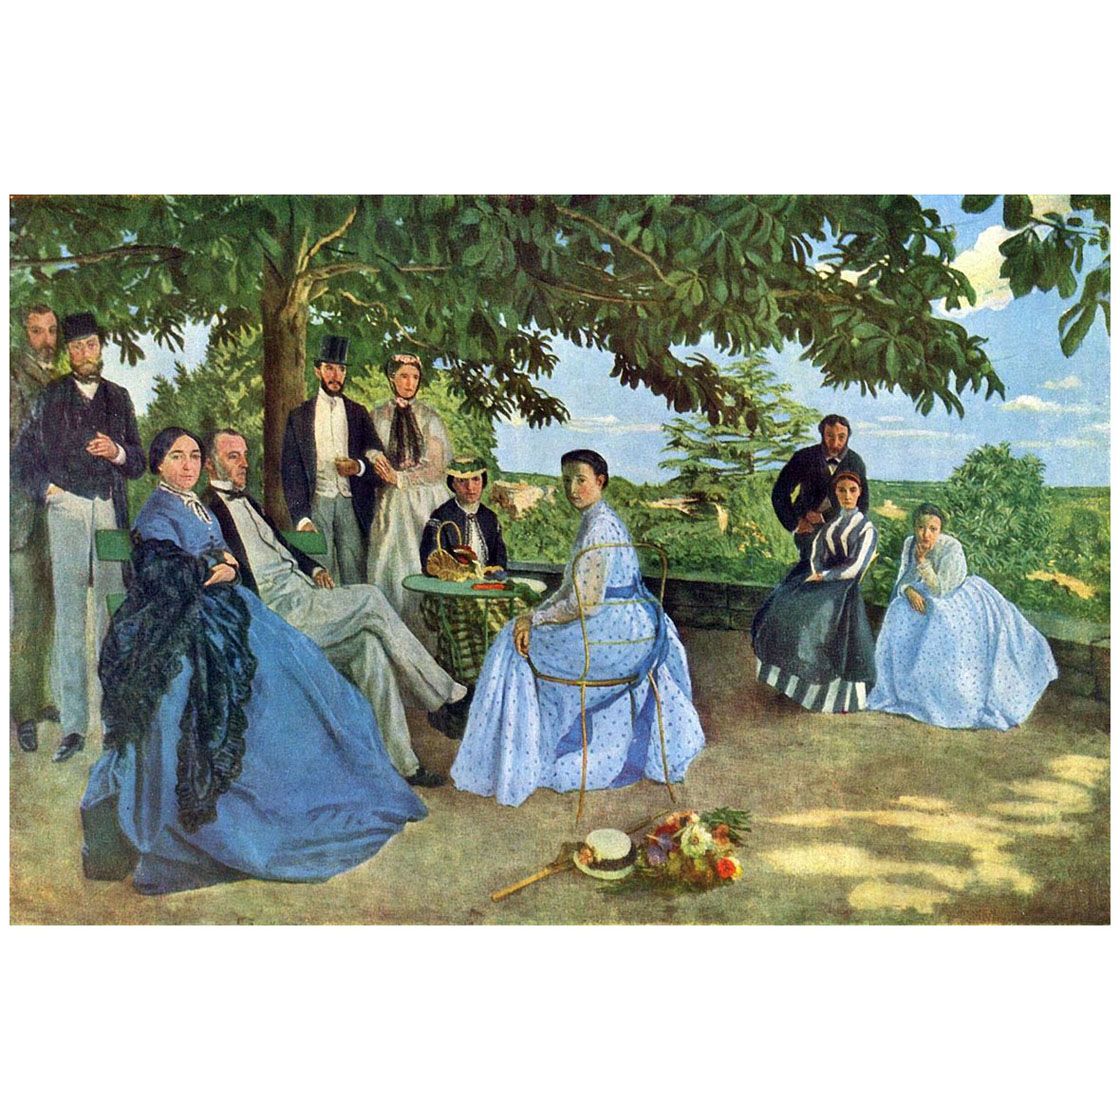 Frederic Bazille. Reunion de famile. 1867. Musee d’Orsay